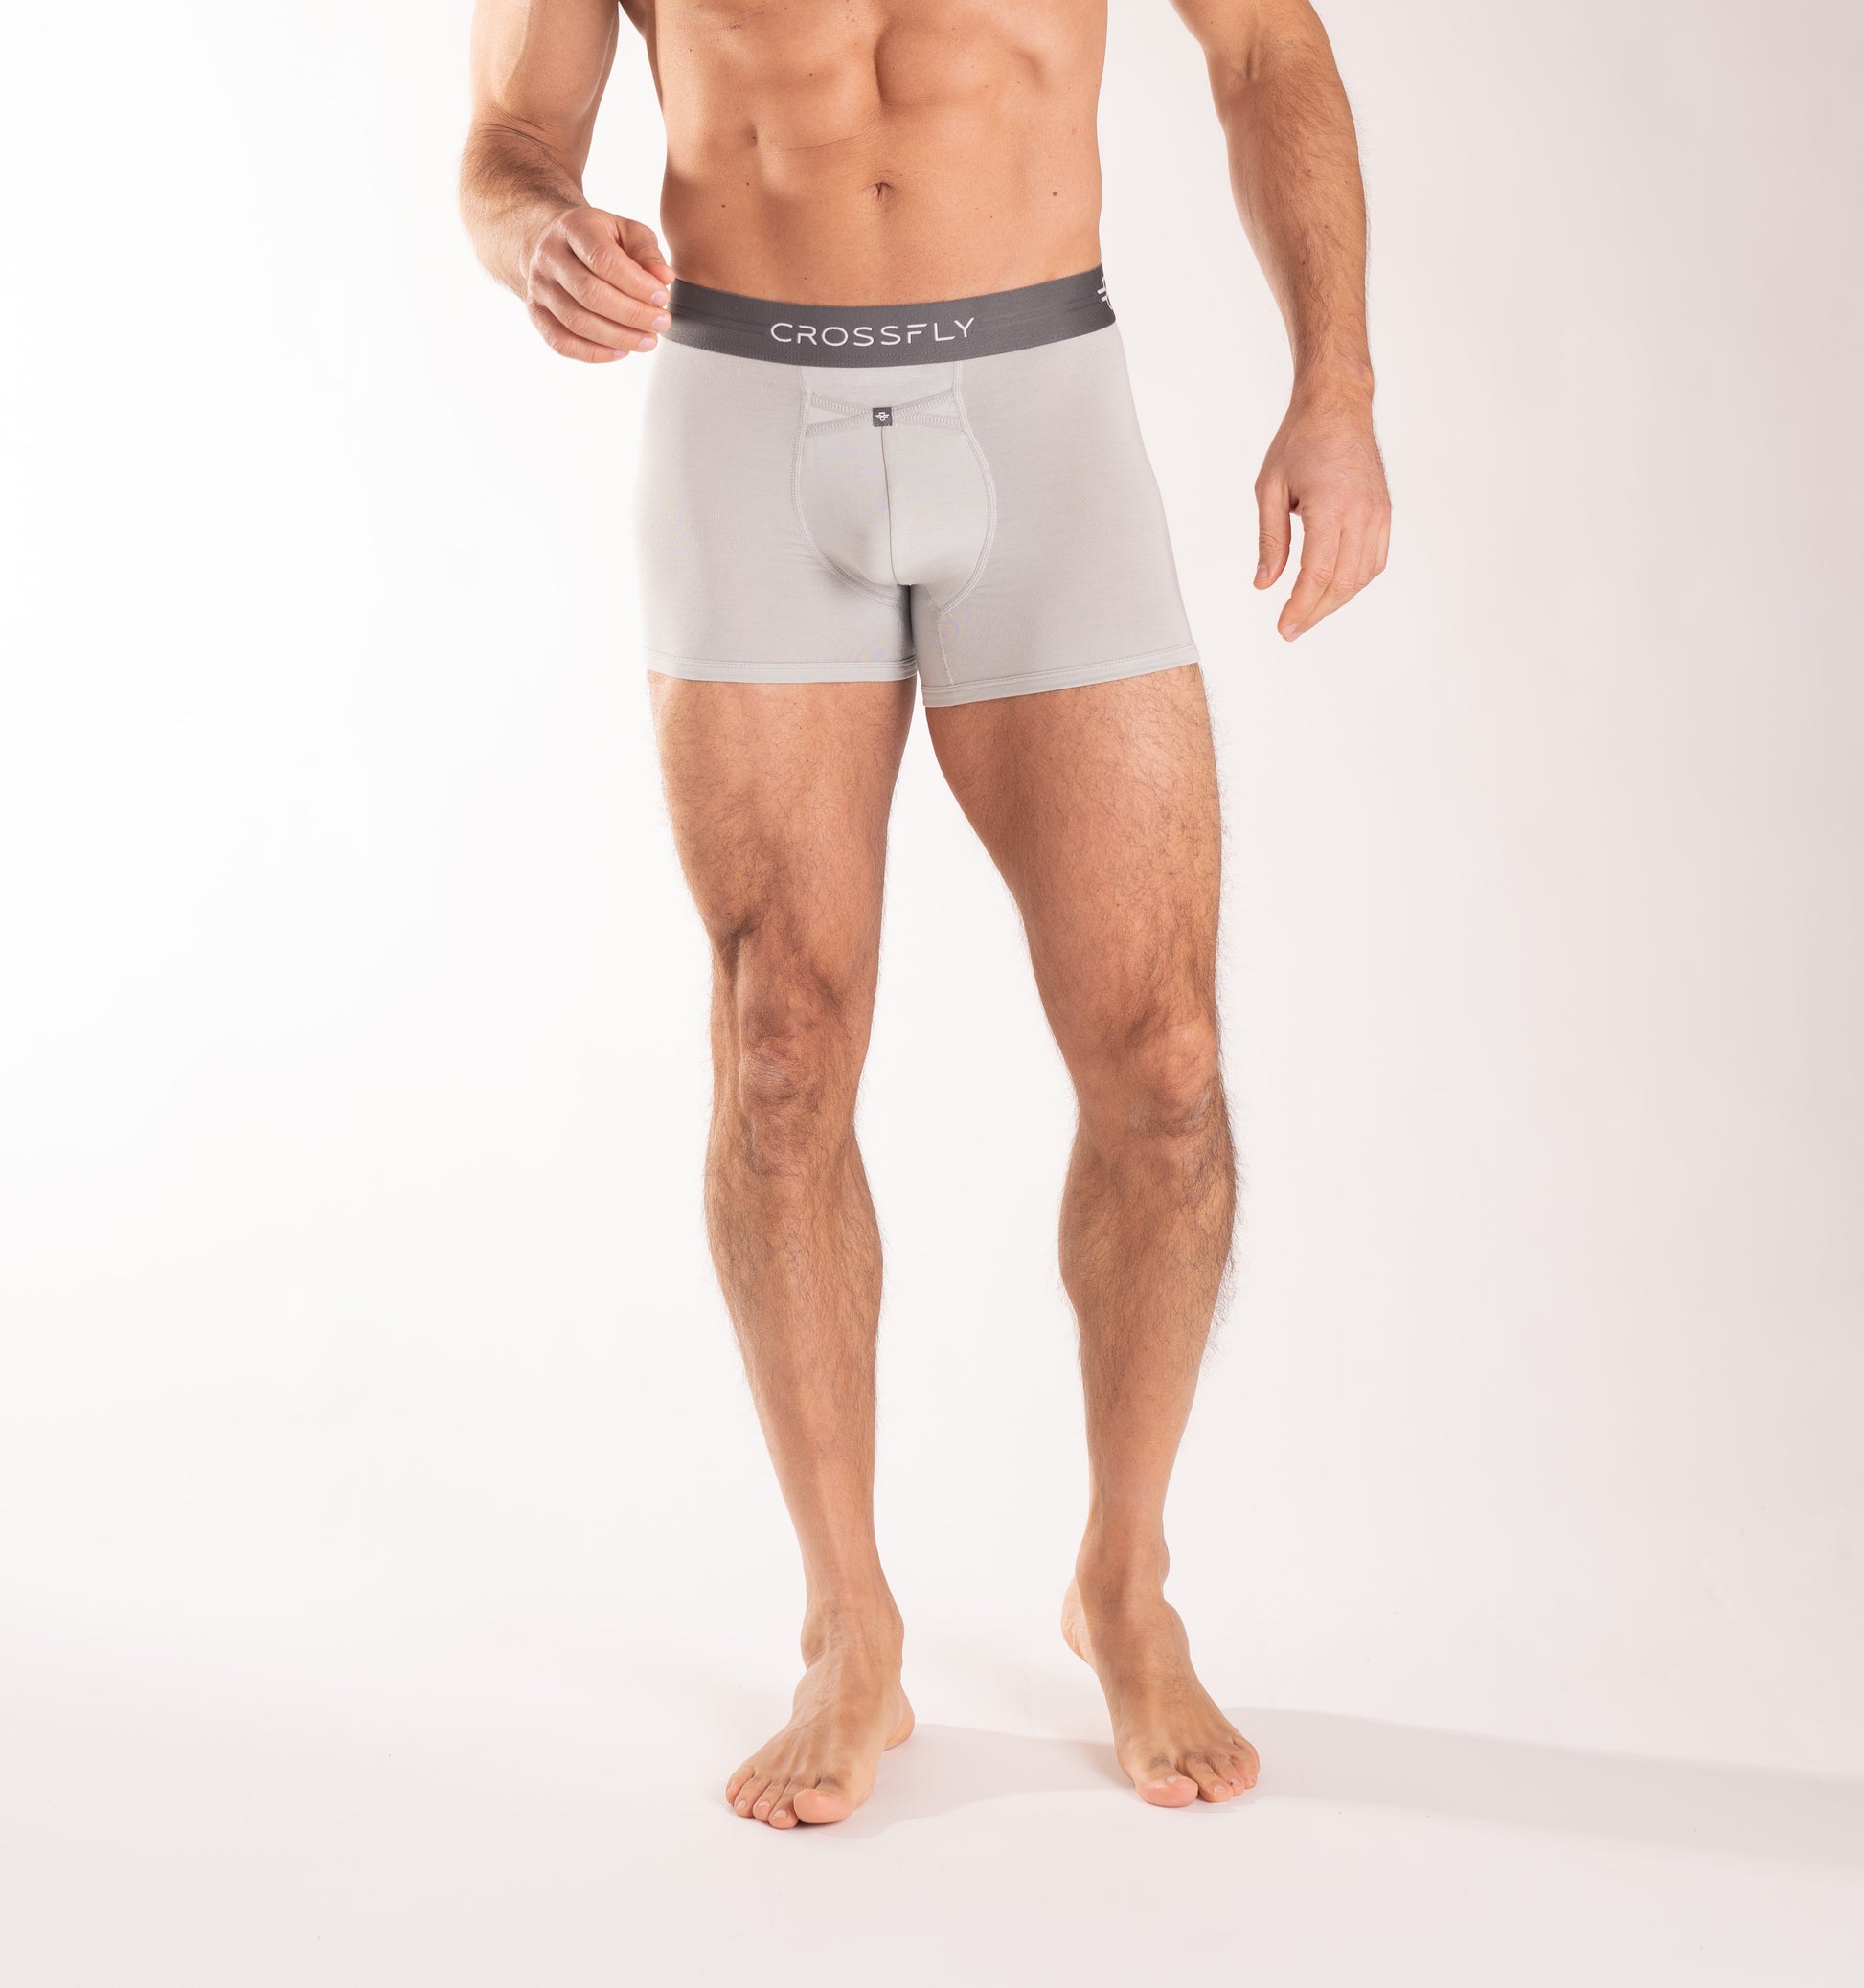 Crossfly men's IKON X 3" silver / charcoal trunks from the Everyday series, featuring X-Fly and Coccoon internal pocket support.